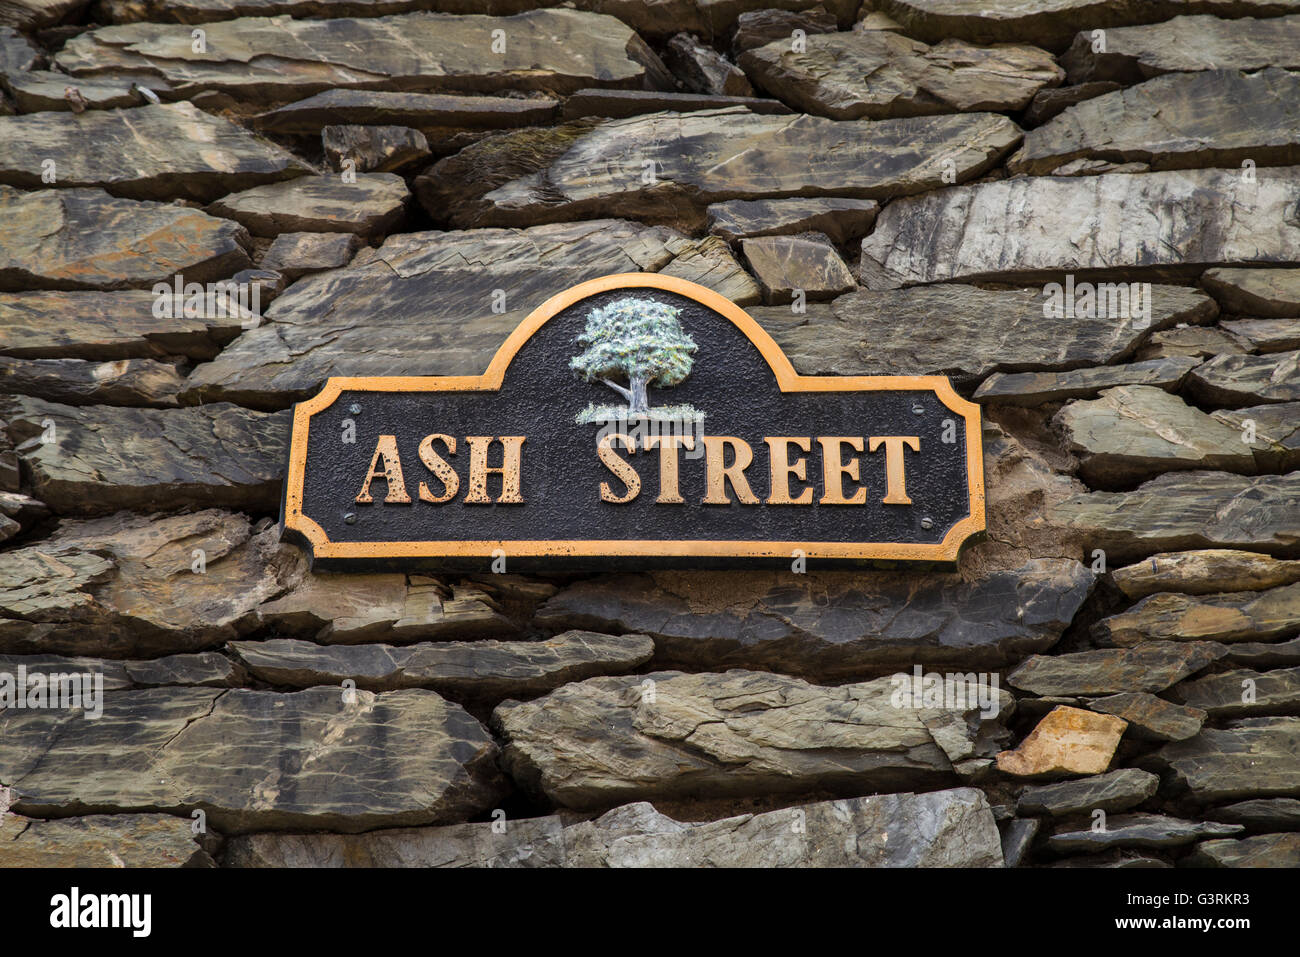 A street sign for Ash Street, located in Bowness-on-Windermere in the Lake District, UK. Stock Photo